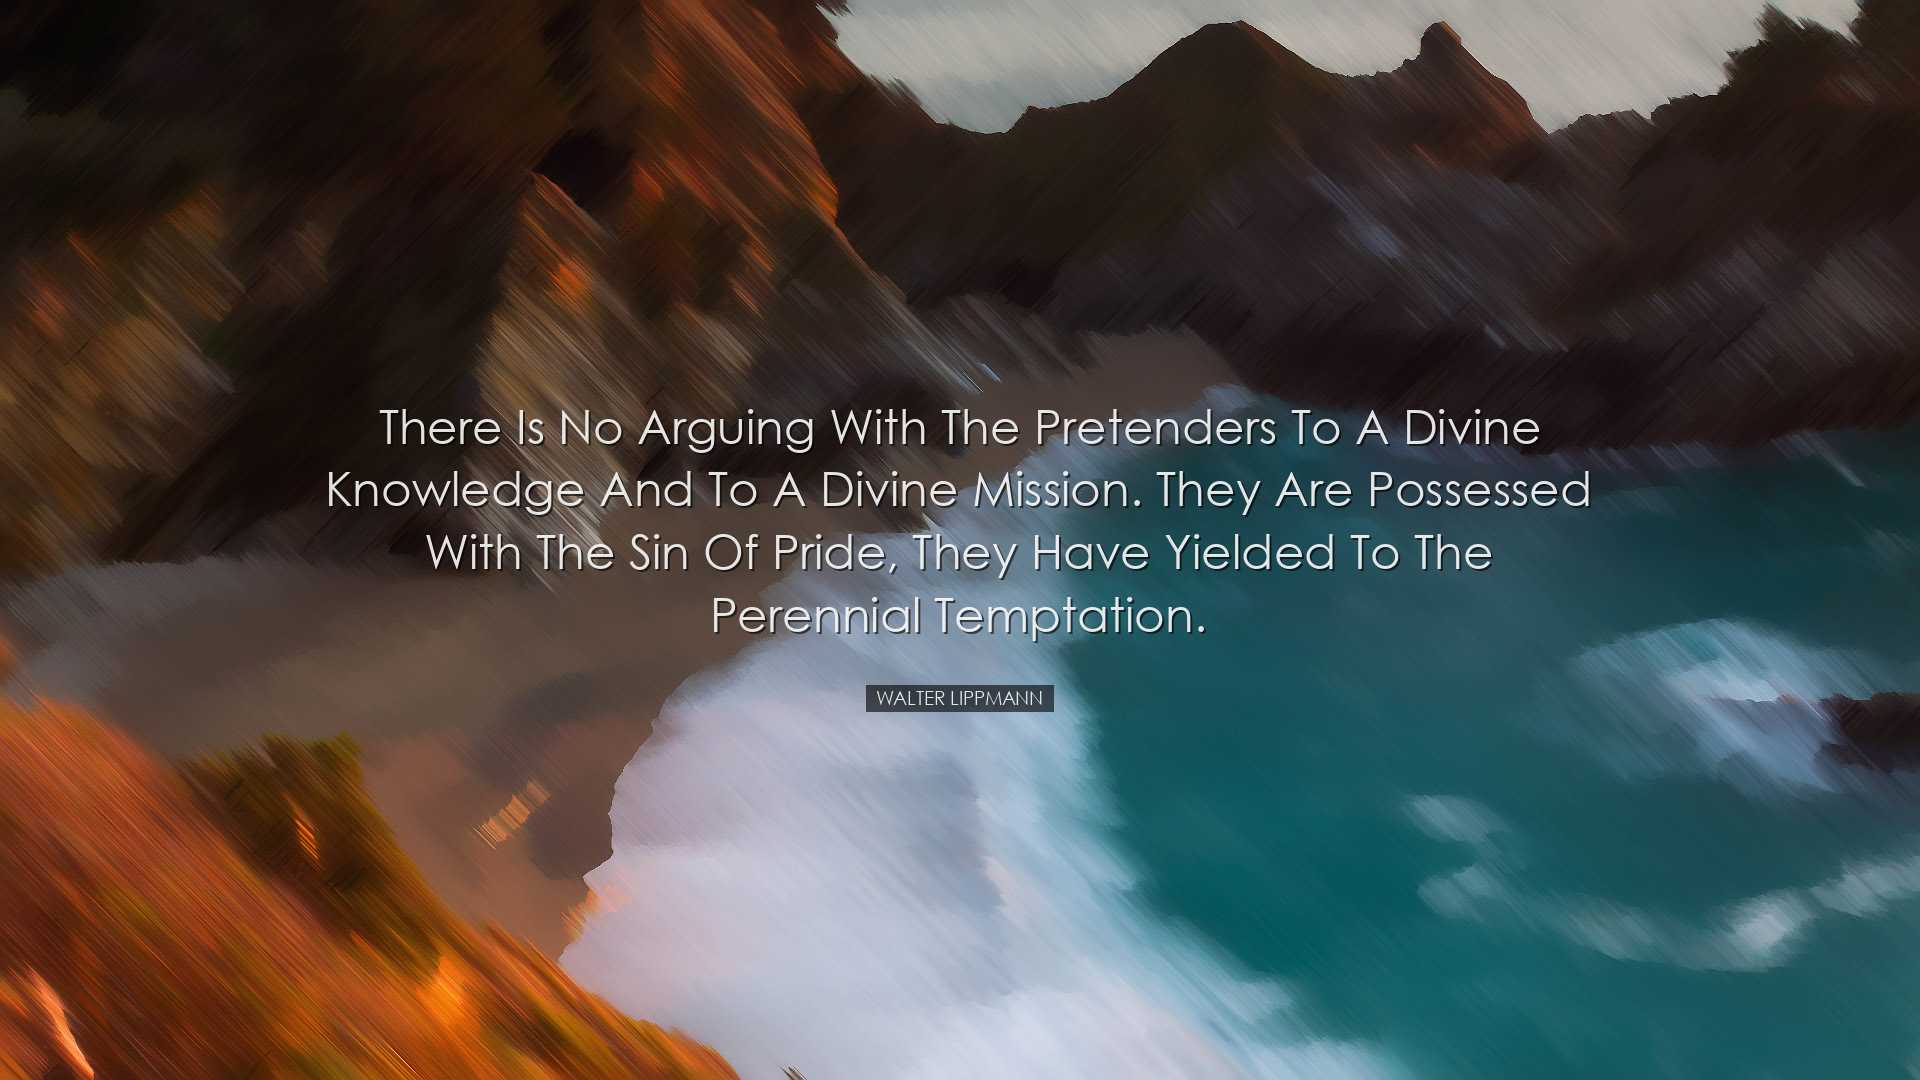 There is no arguing with the pretenders to a divine knowledge and